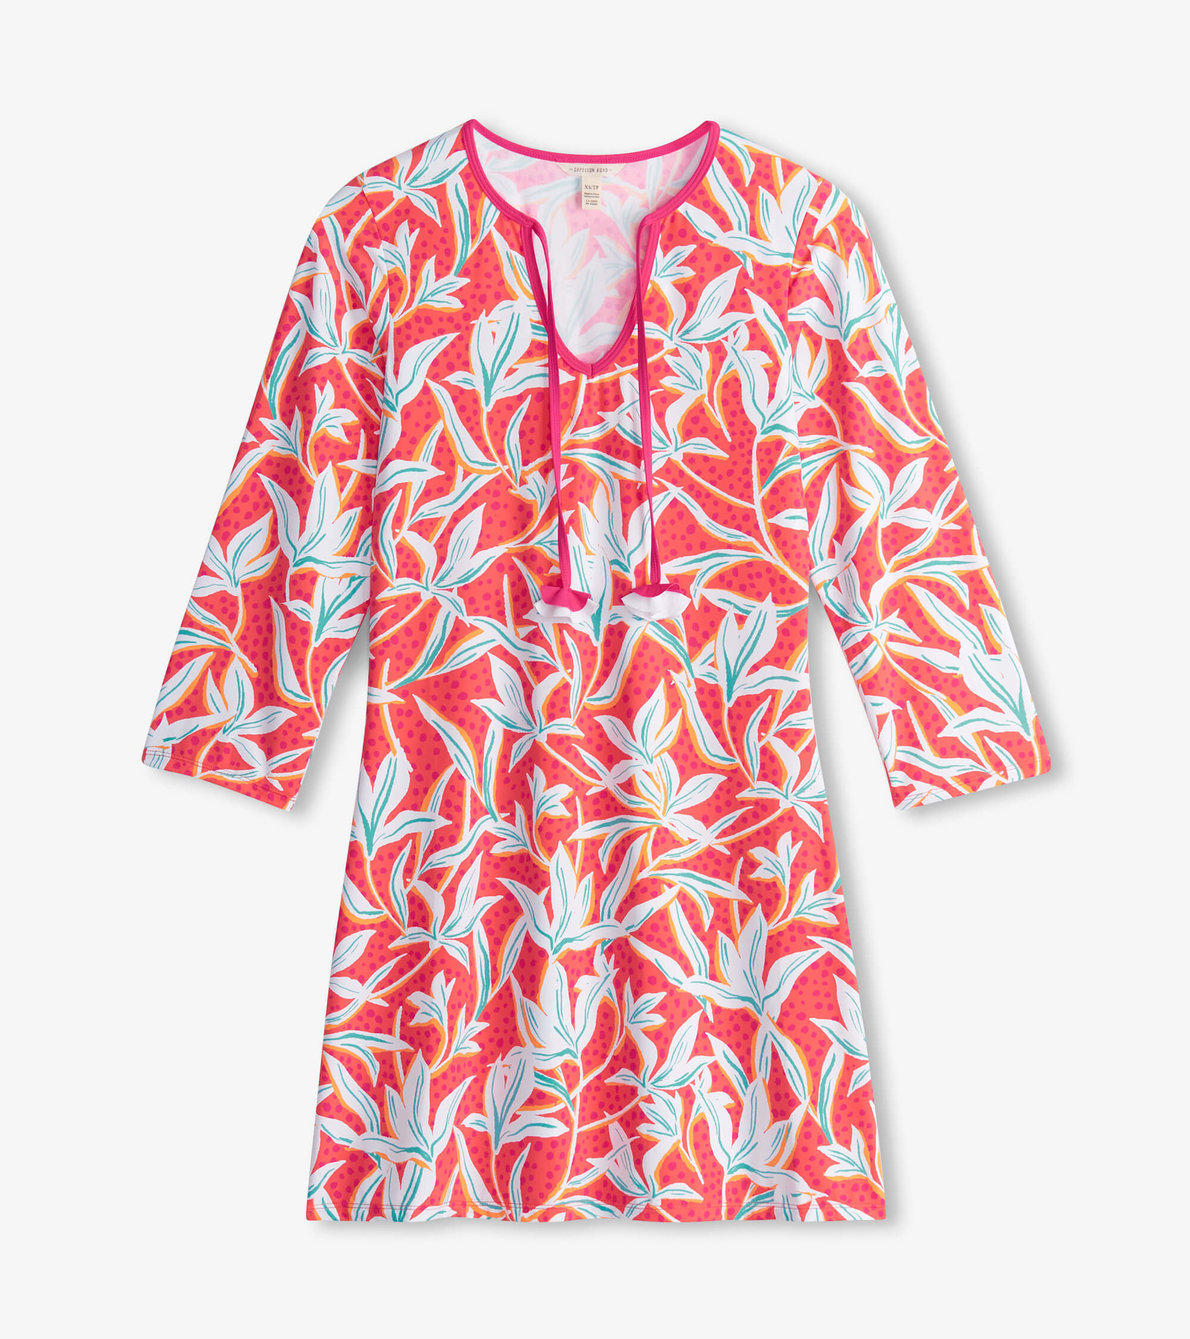 View larger image of Women's Leafy Floral Beach Dress